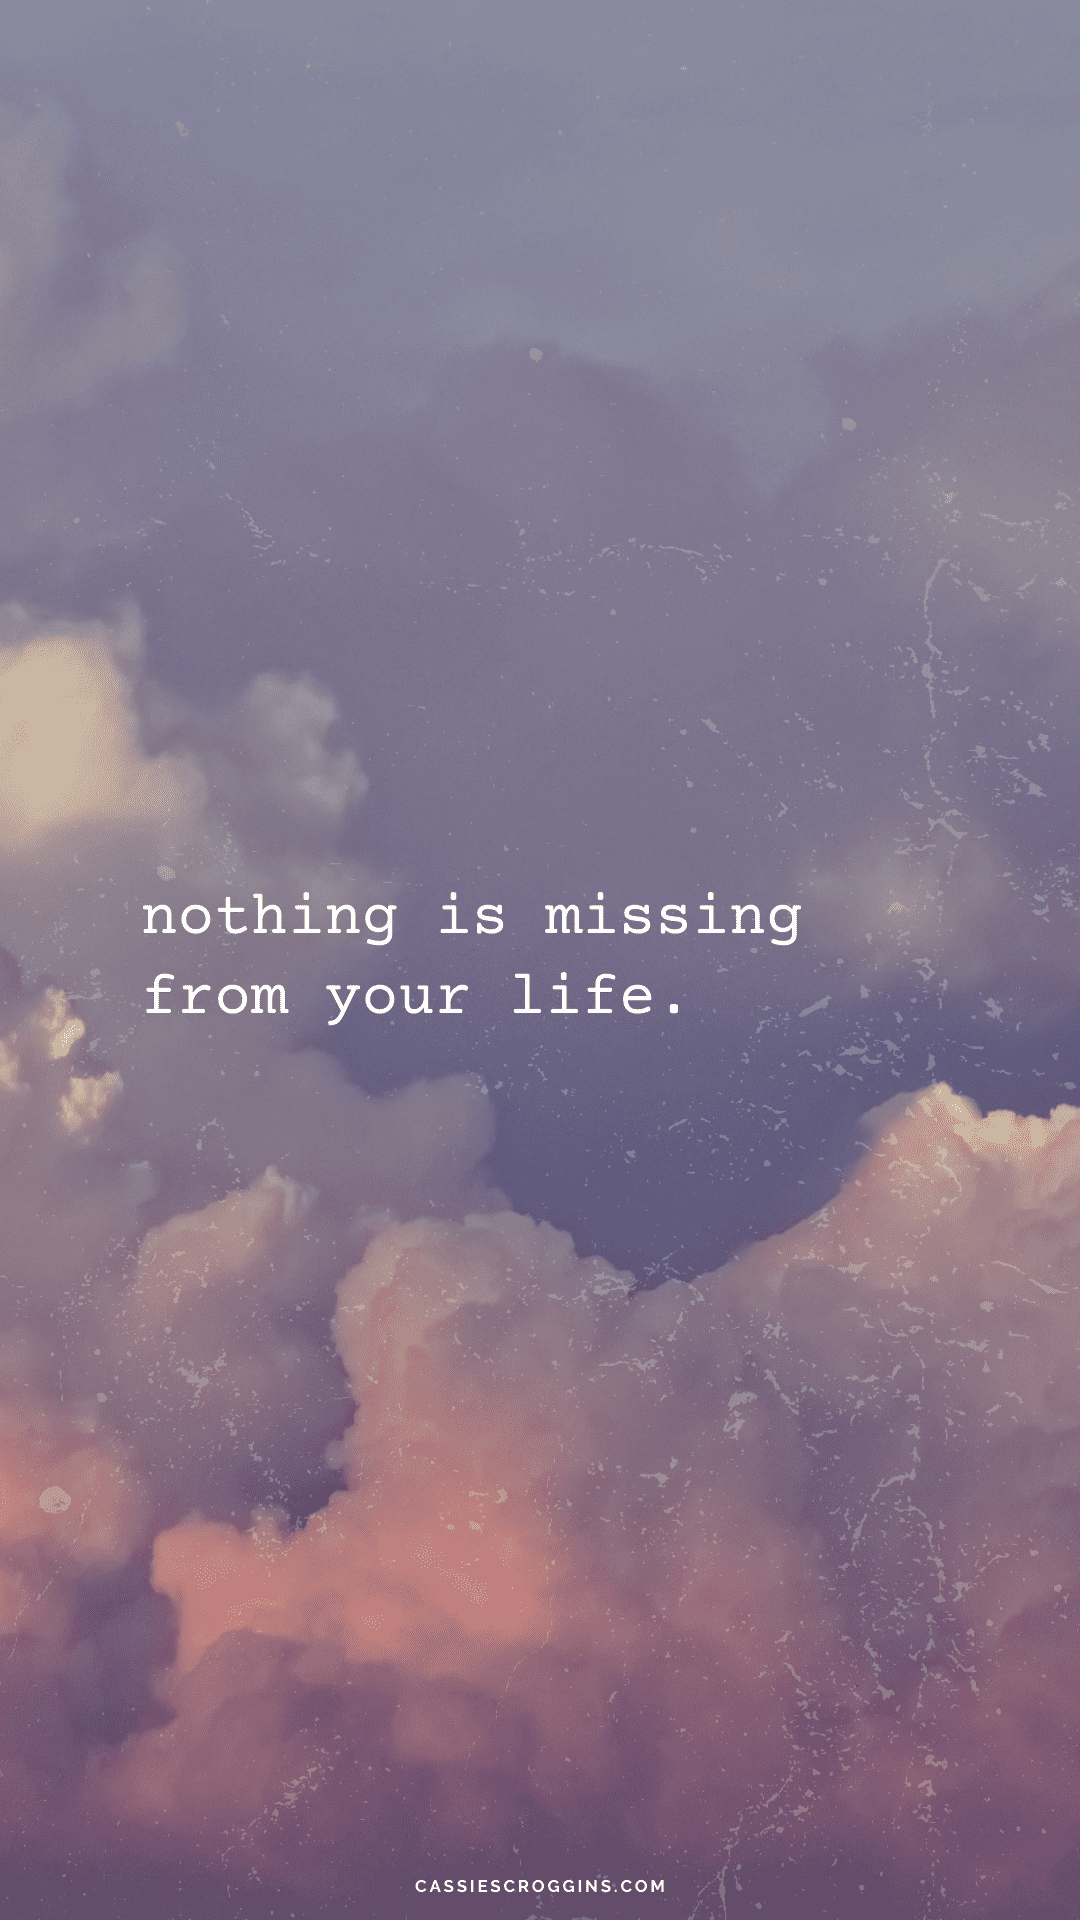 Nothing is missing from your life. - Inspirational, positive